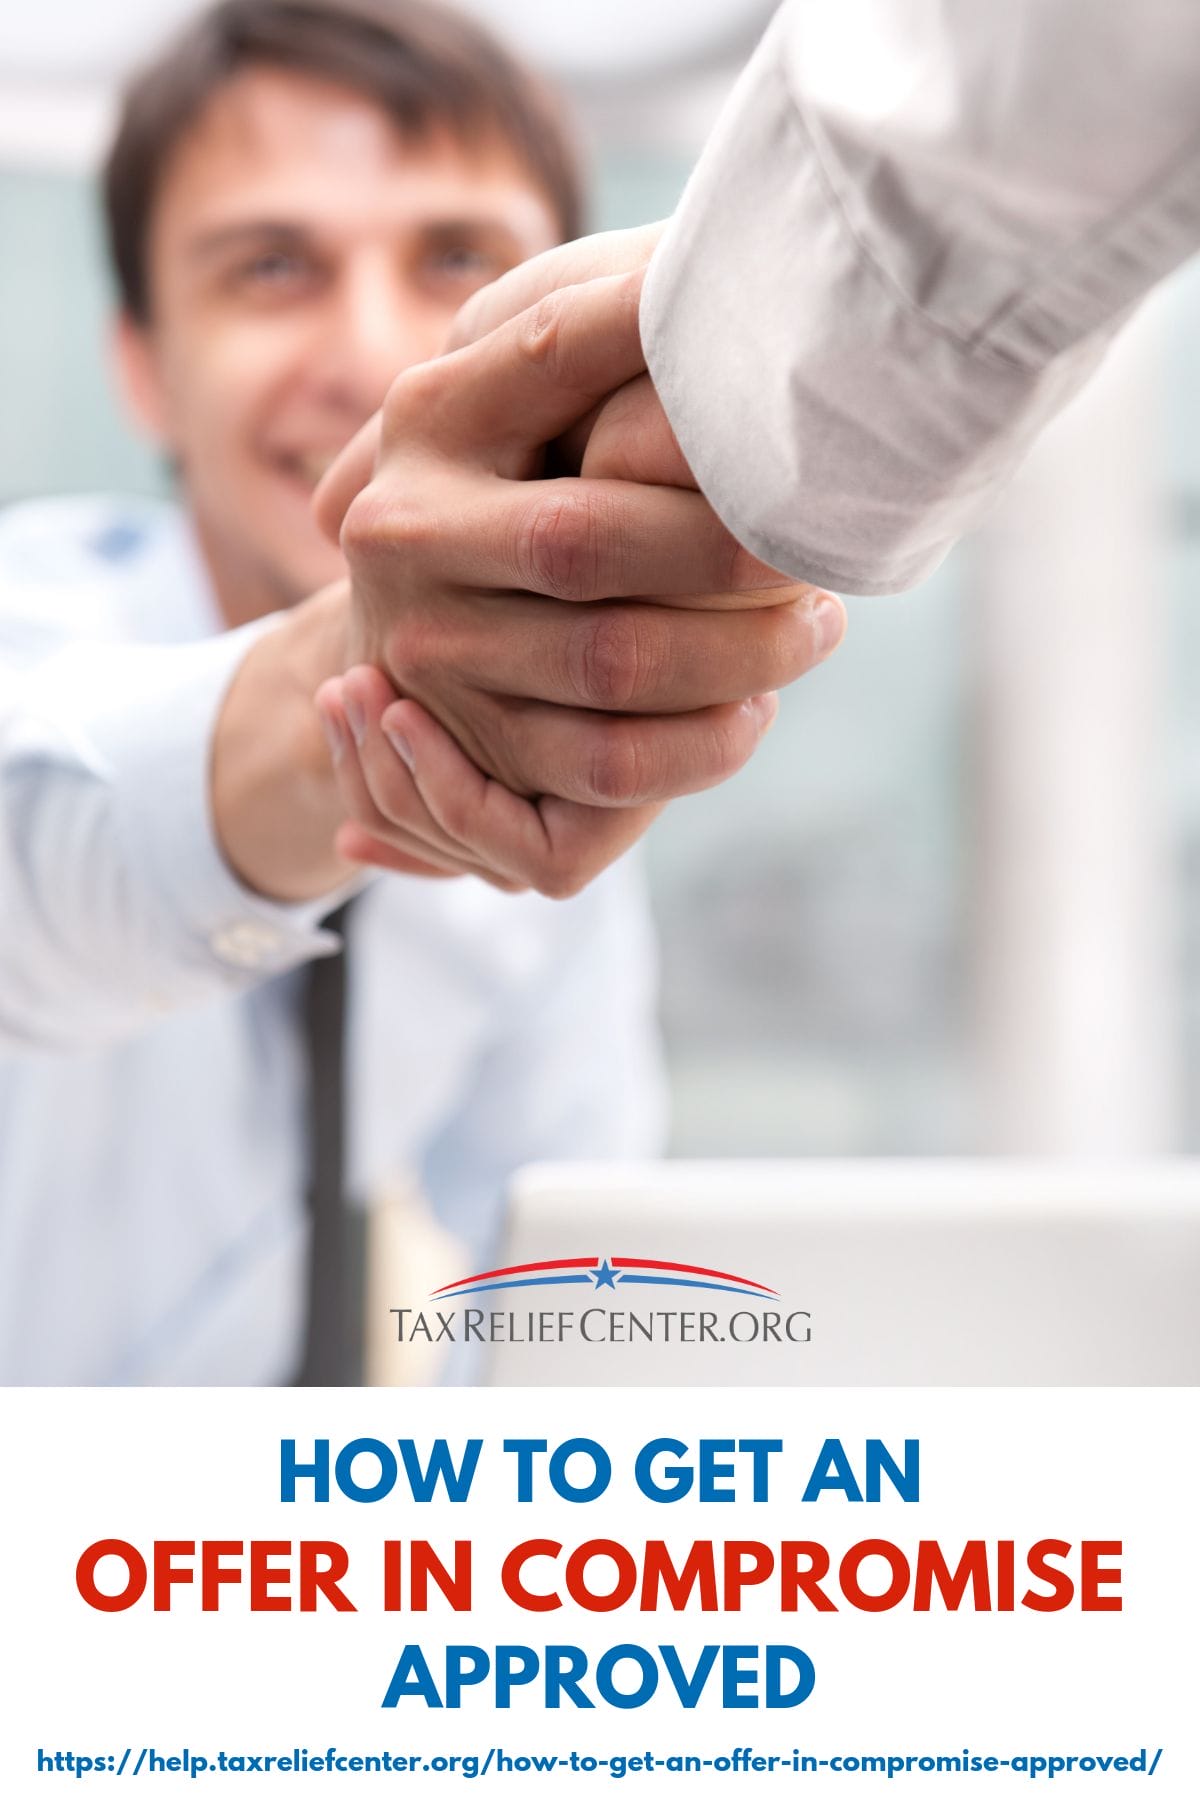 How To Get An Offer In Compromise Approved | 11 Tips https://help.taxreliefcenter.org/how-to-get-an-offer-in-compromise-approved/